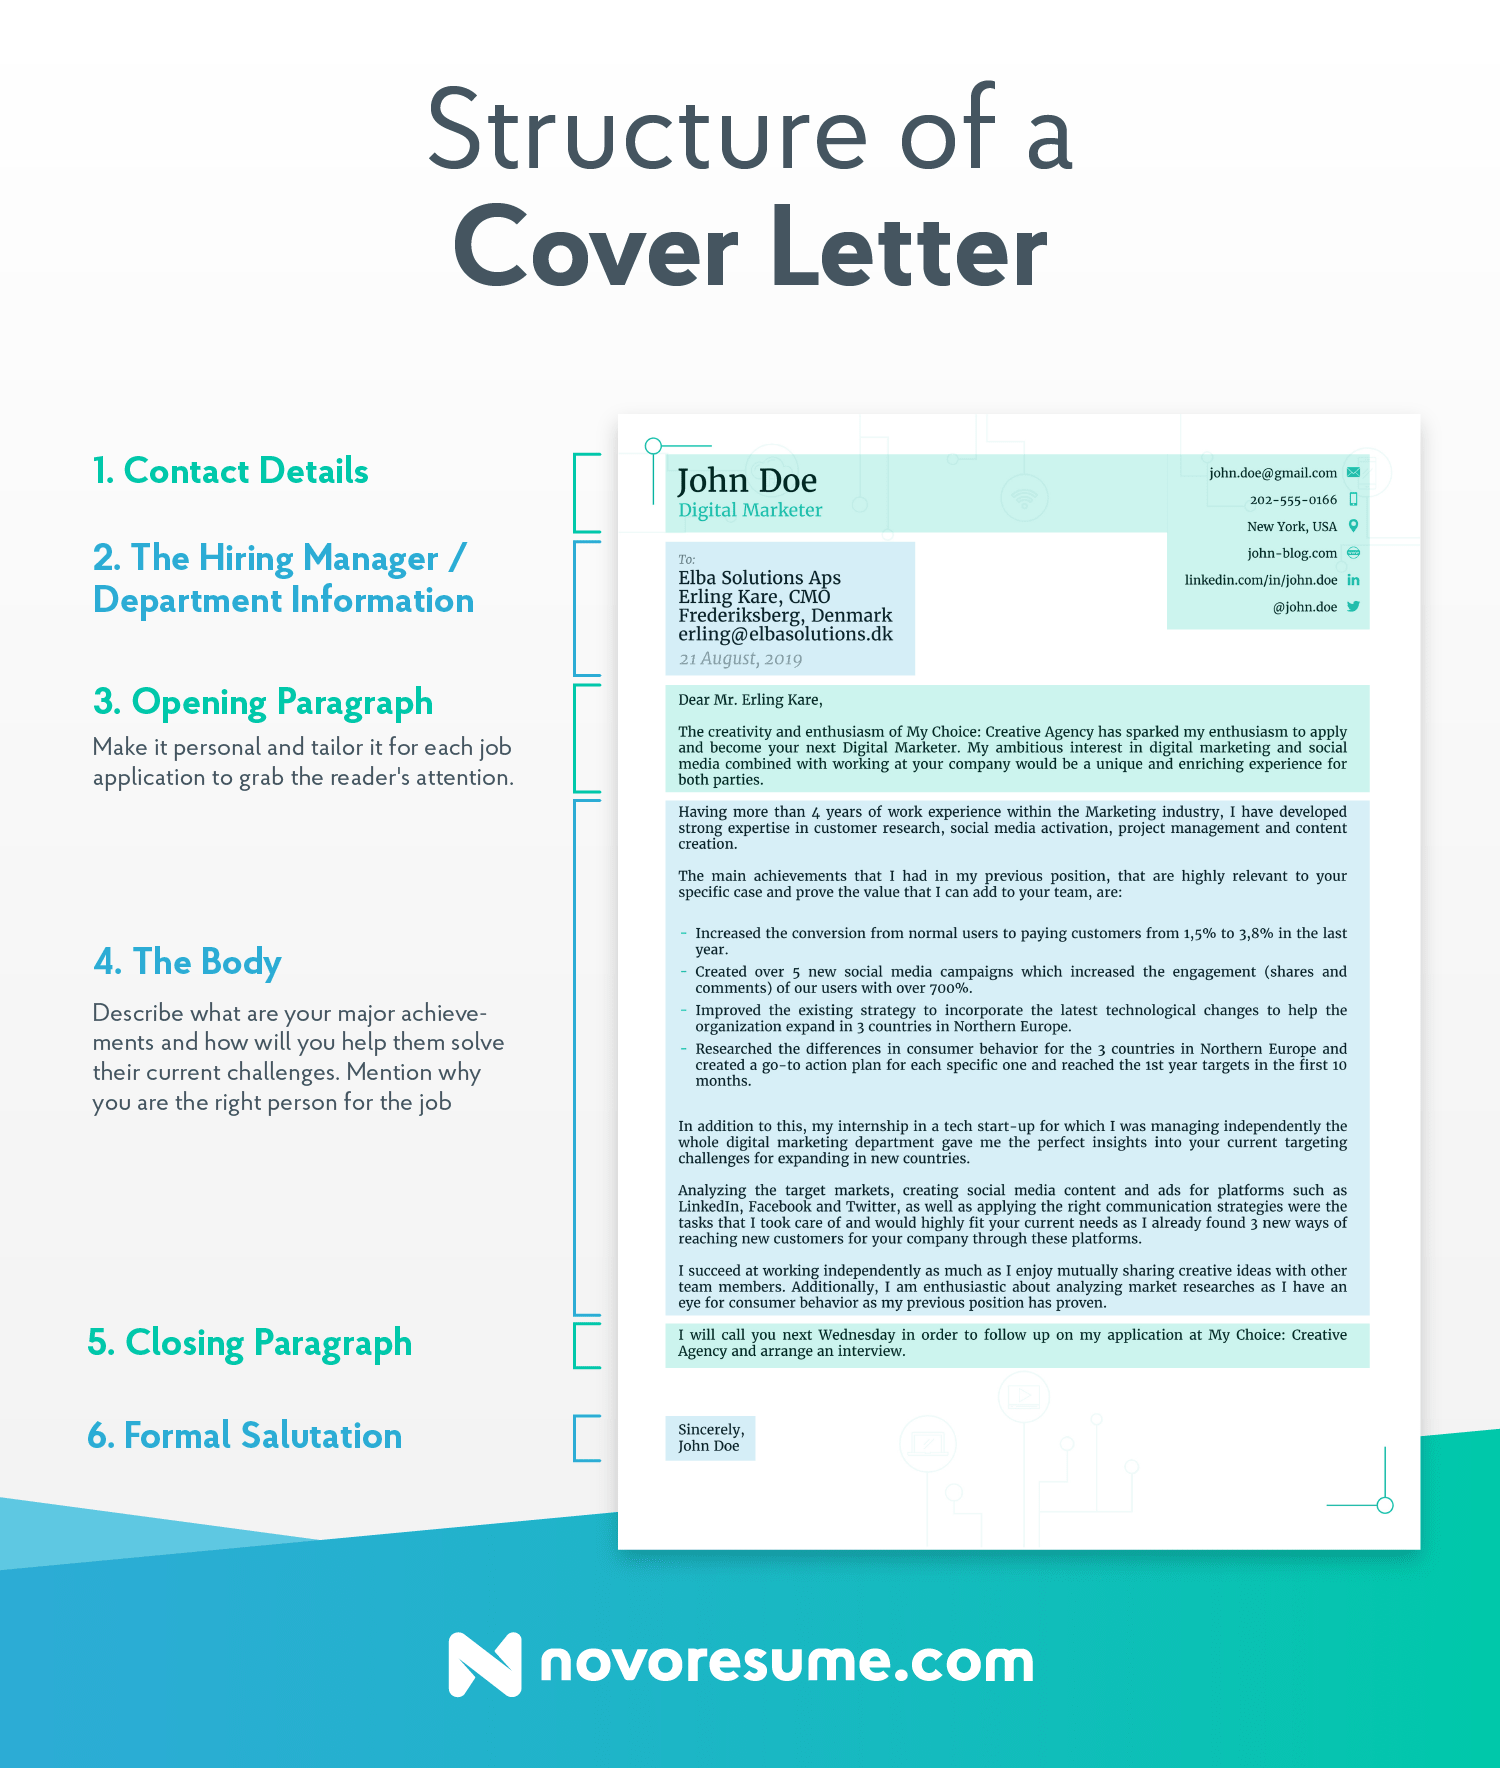 data scientist cover letter structure